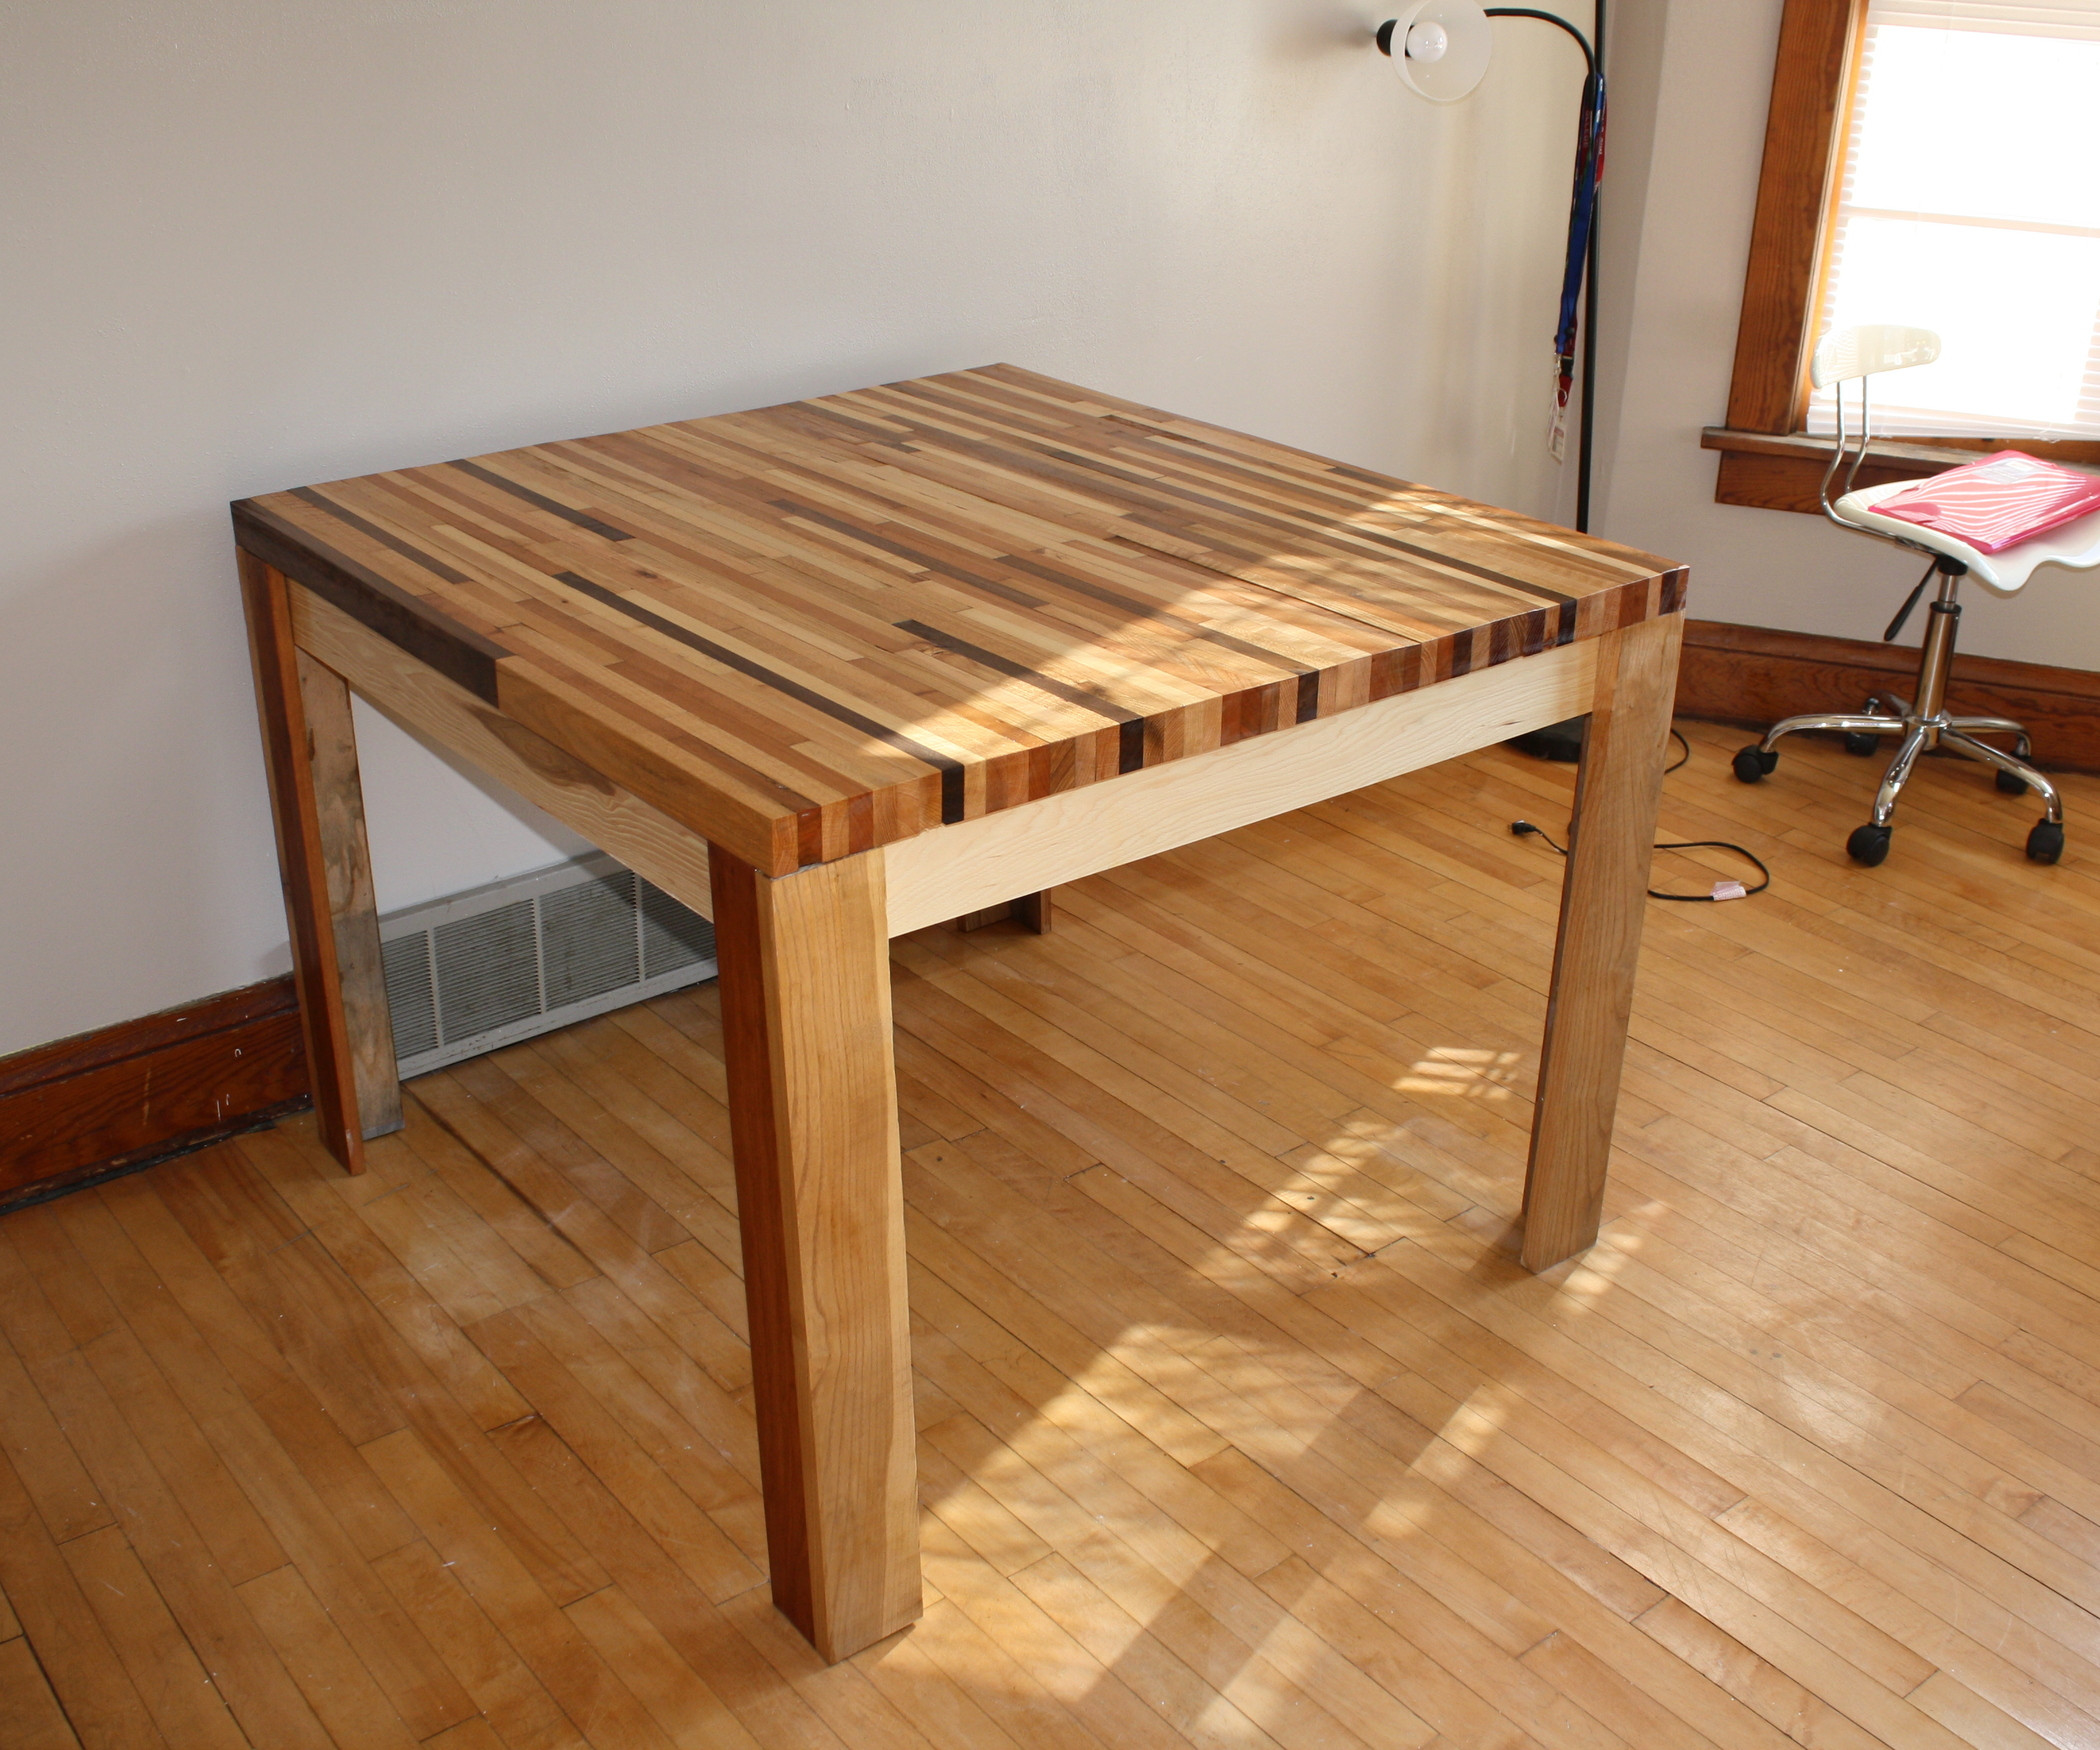 Best ideas about Wood Table DIY
. Save or Pin Butcher Block Hardwood Table 5 Steps with Now.